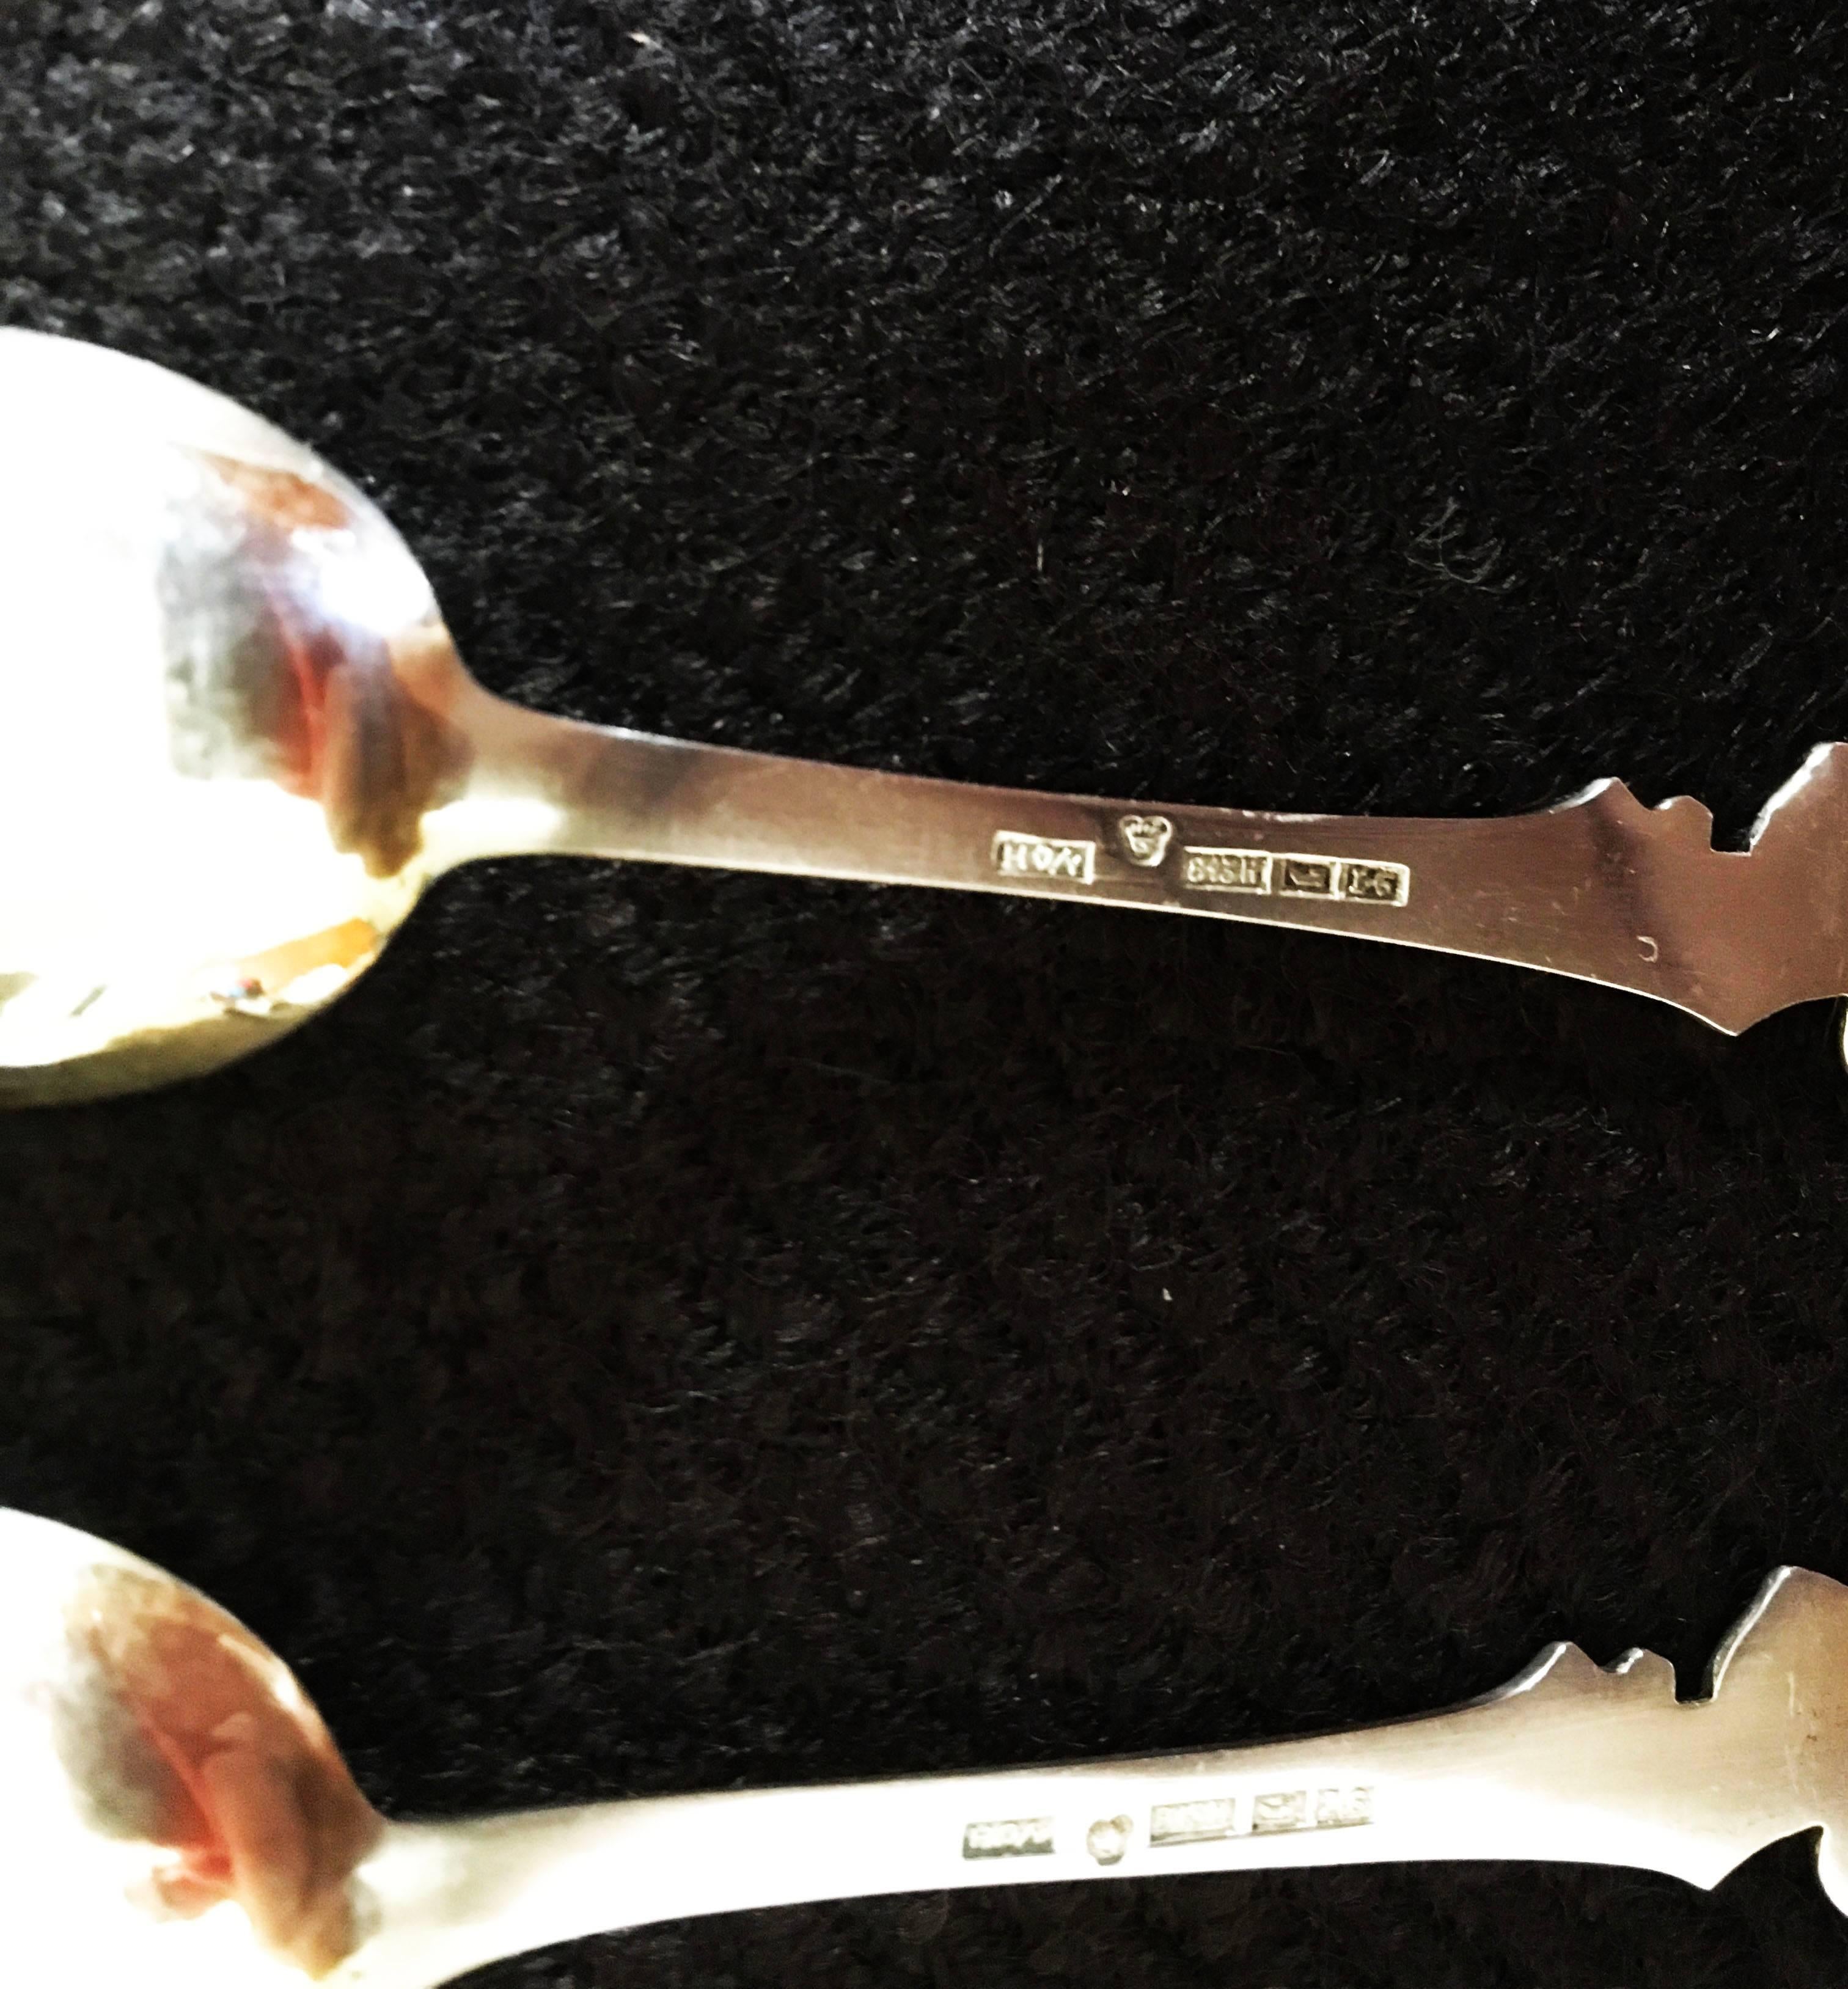 French silver 18-karat gold tea coffee spoons set 12 pieces and cake server.
The set has a fantastic foliage and flowers motif. 18-karat gold, no monograms.

Measures: 5